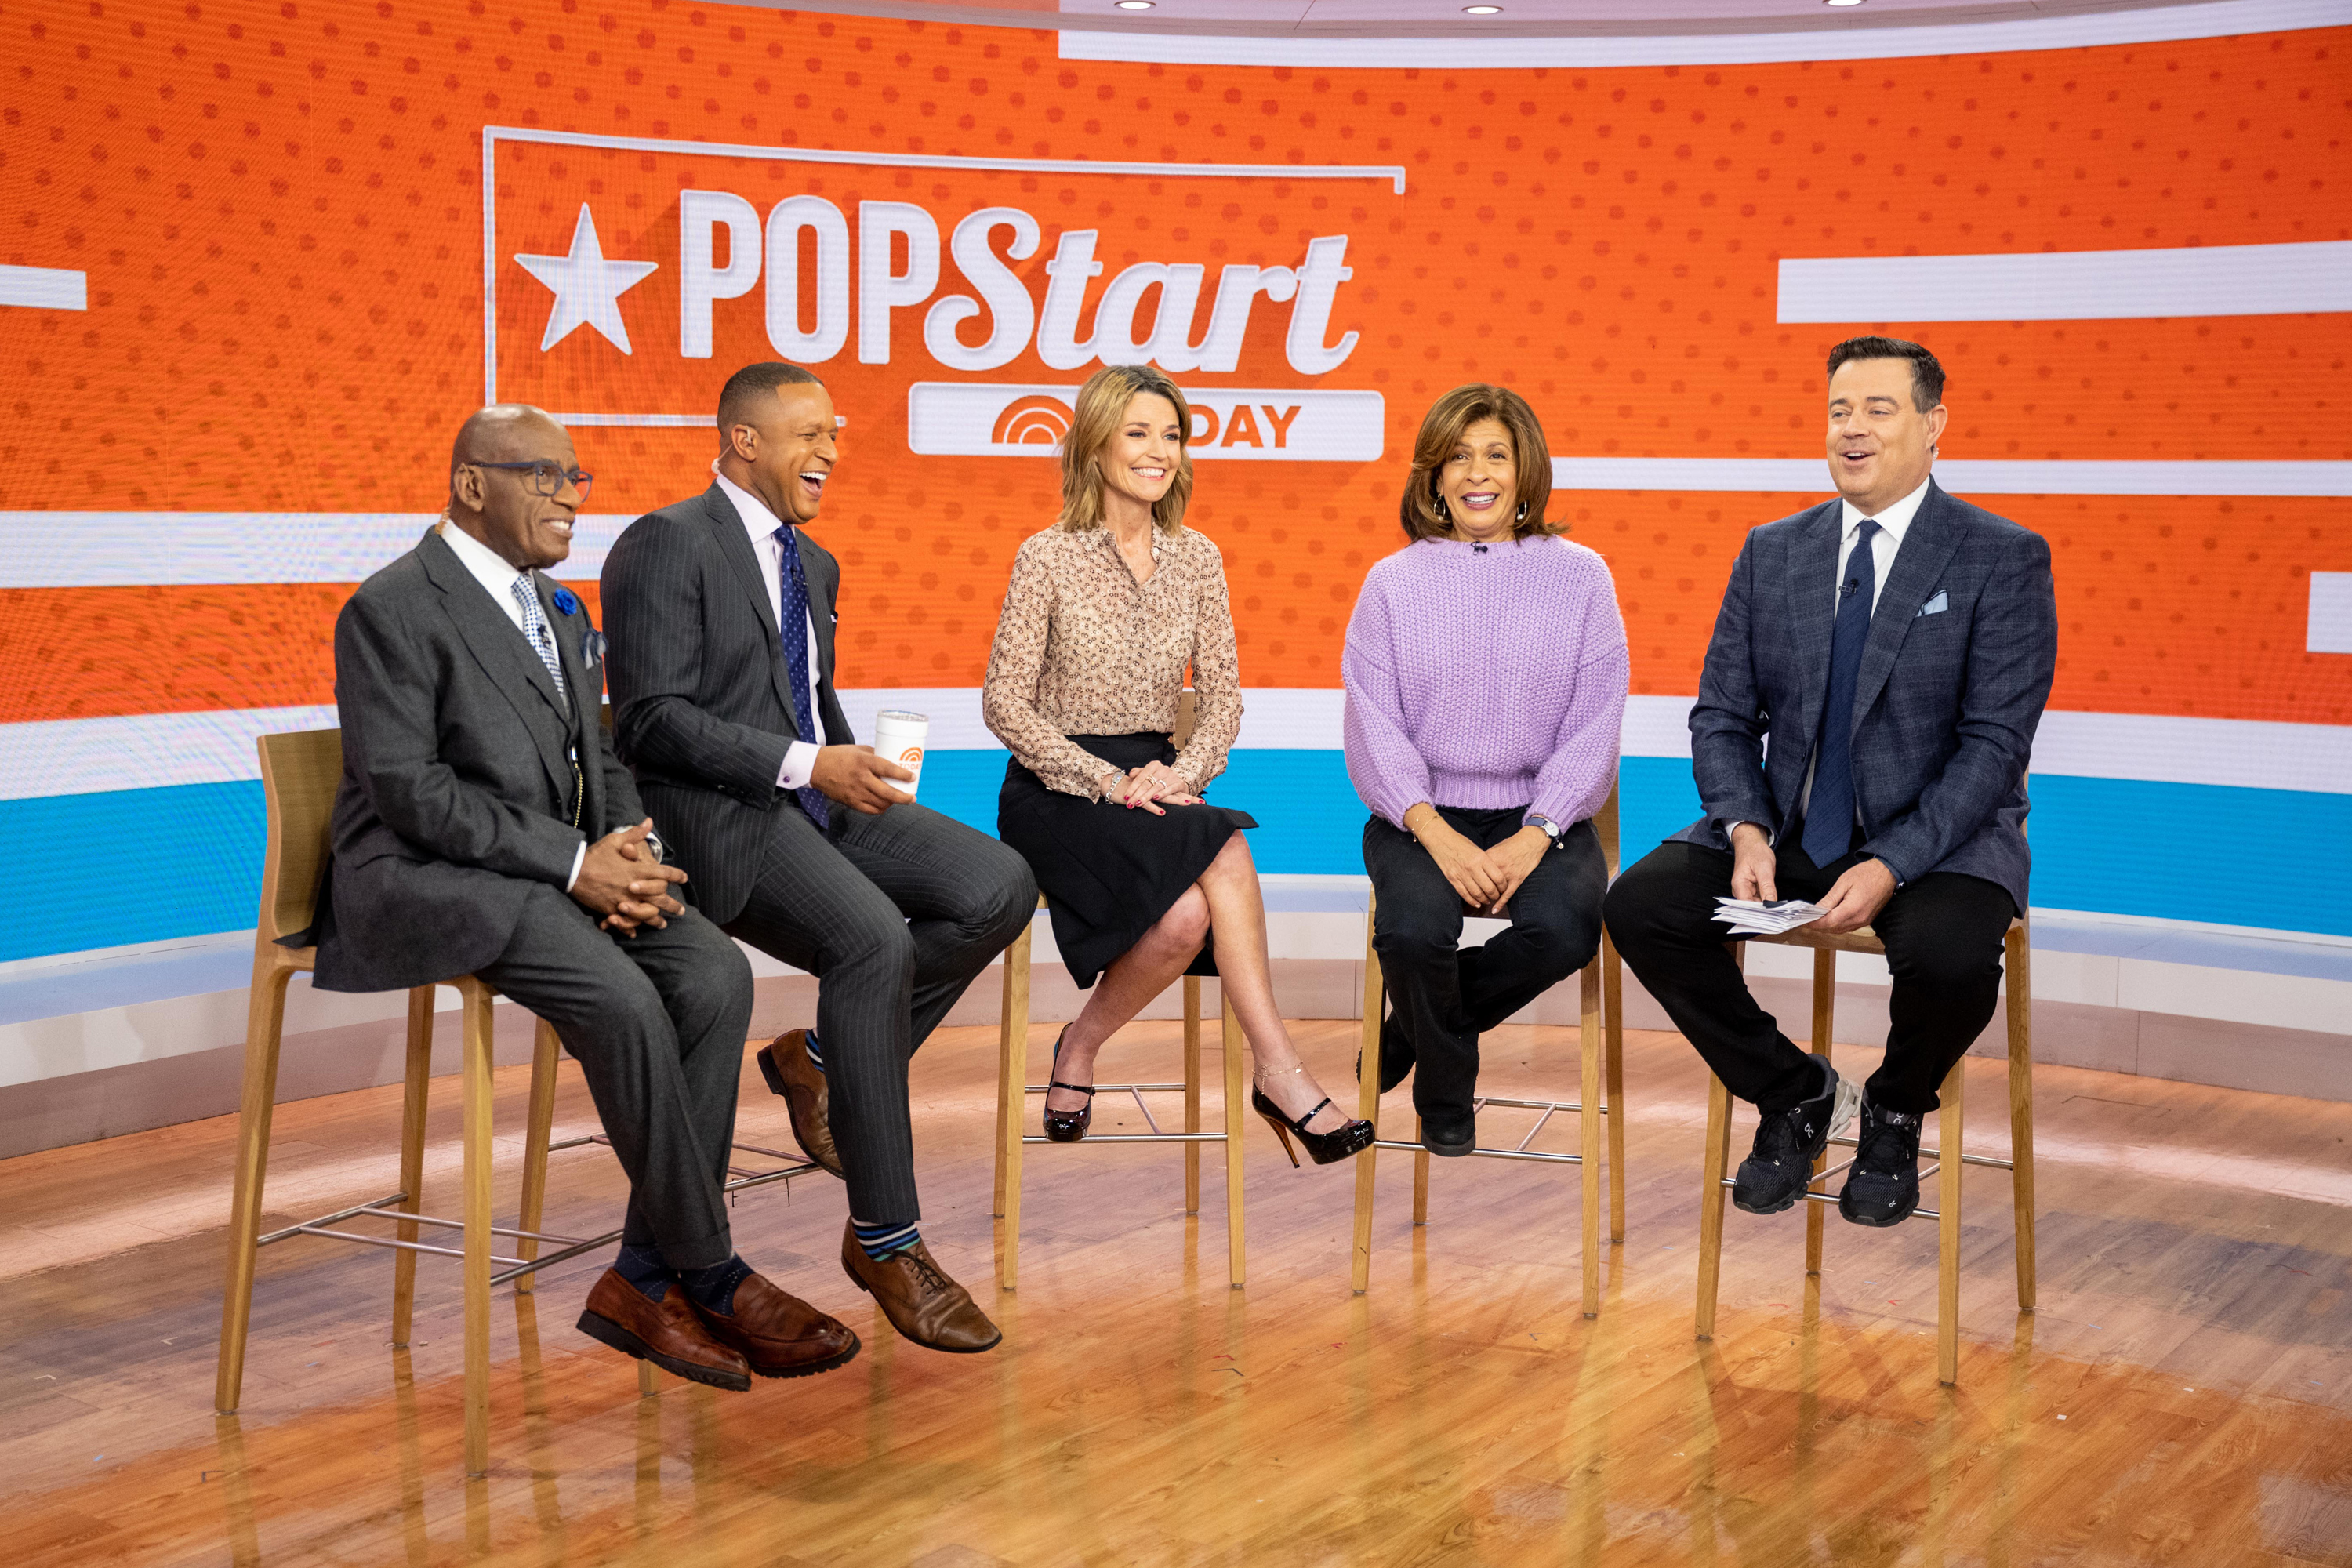 Carson typically leads the POPStart segment on Today, which is the pop culture round up, when he is in